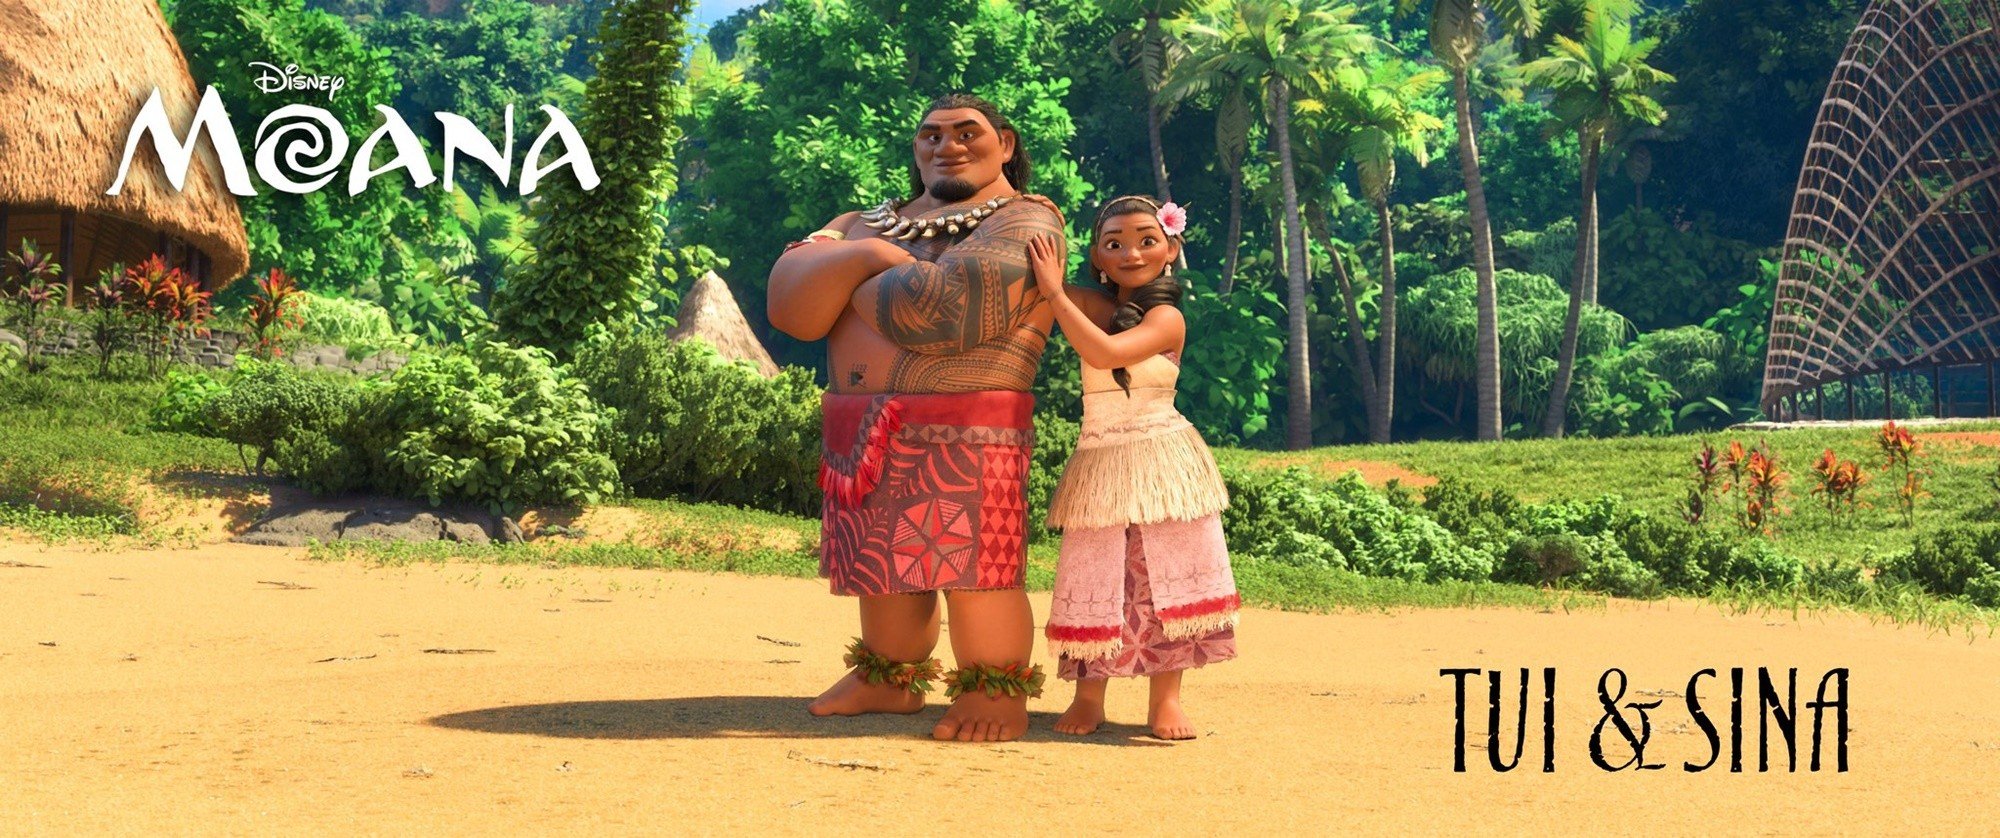 Chief Tui and Sina from Walt Disney Pictures' Moana (2016)